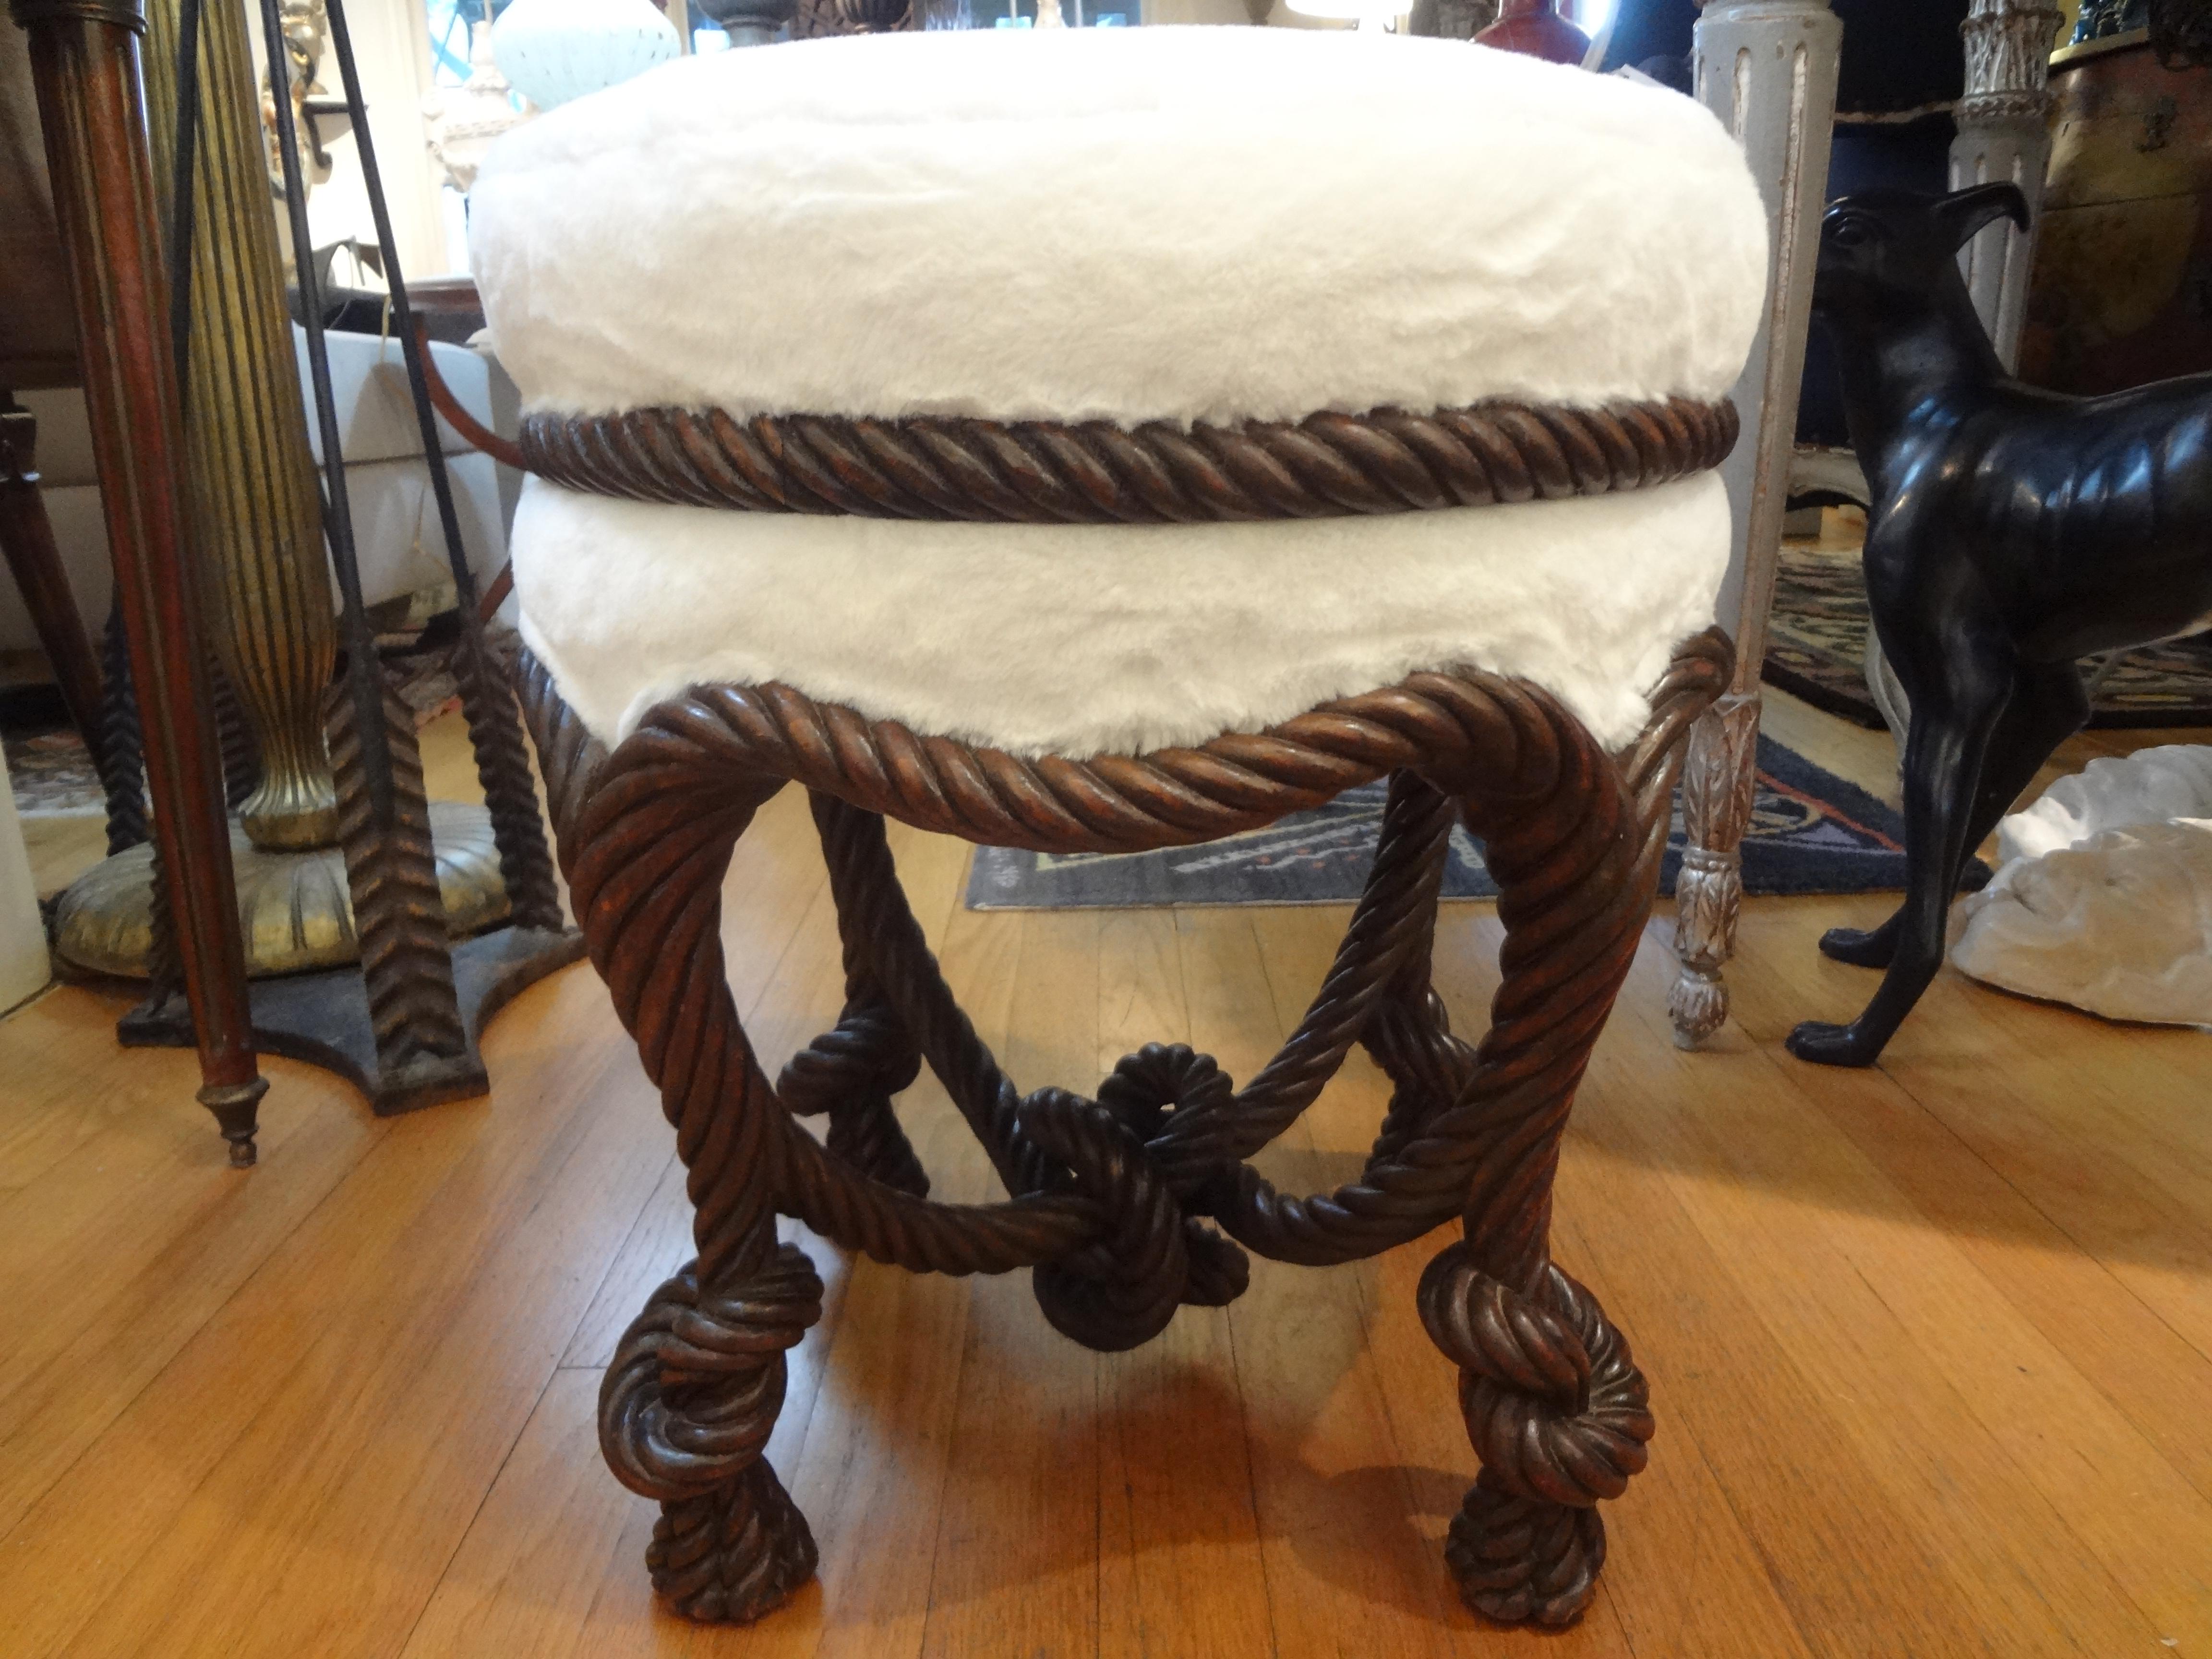 Stunning antique French A.M.E. Fournier style carved wood ottoman, bench, stool, tabouret or pouf with a knotted cross stretcher and knotted tassel legs. This beautiful French Louis XVI style-Napoleon III style pouf has been professionally